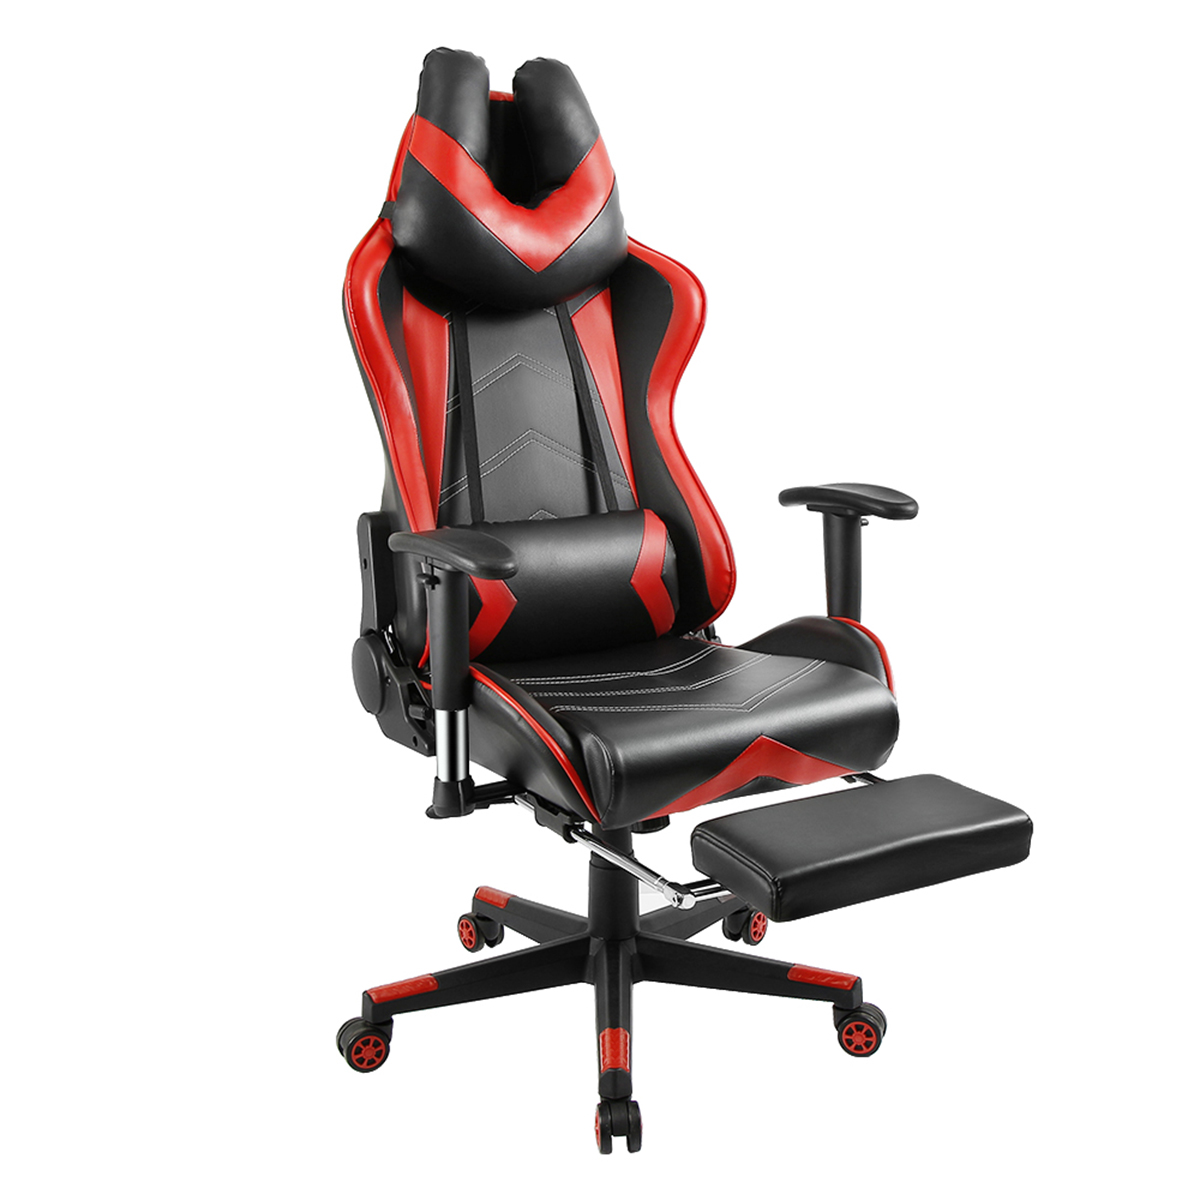 

GC01 Gaming Chair Office Computer Chair High Back PU Leather Executive Laptop Desk Chair Adjustable Swivel Racing Game Chair with Ergonomic Footrest Headrest Lumbar Support